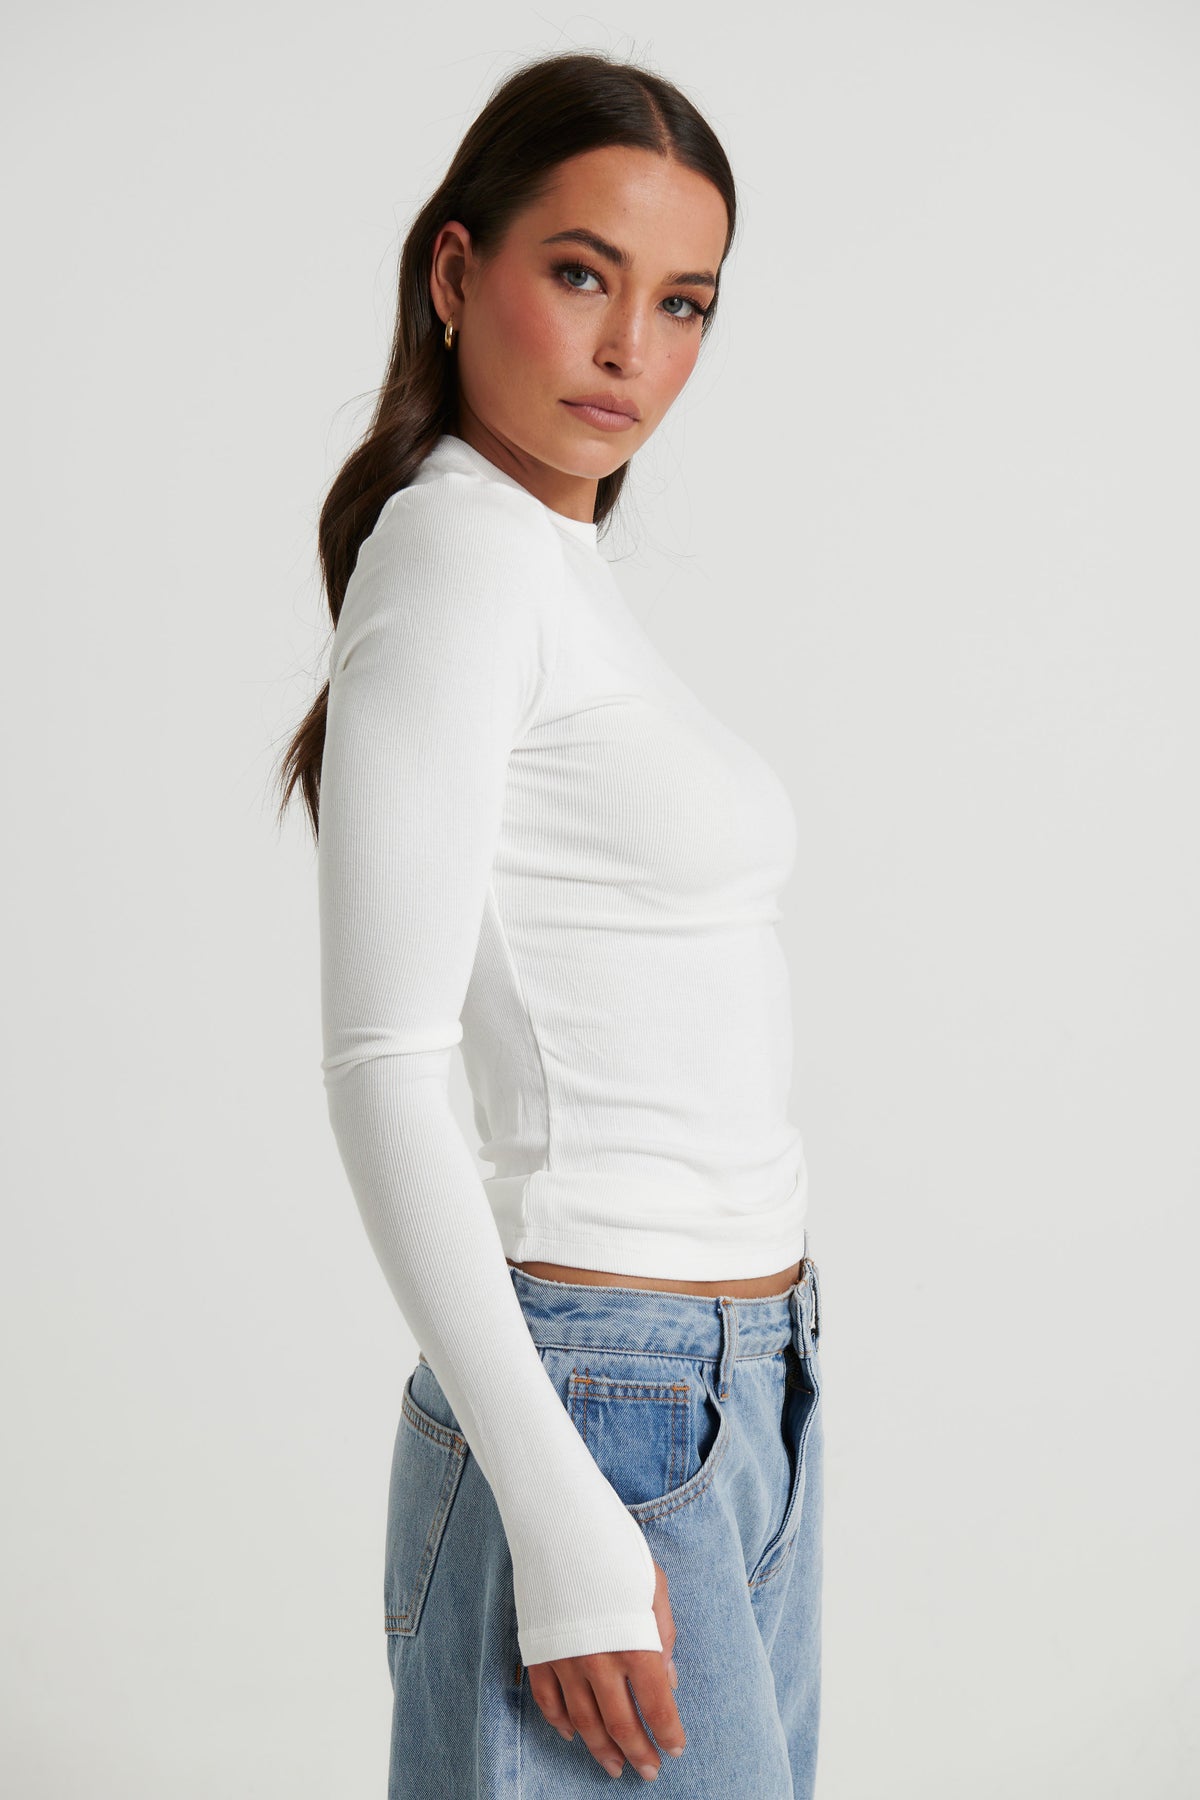 Cassidy Top White